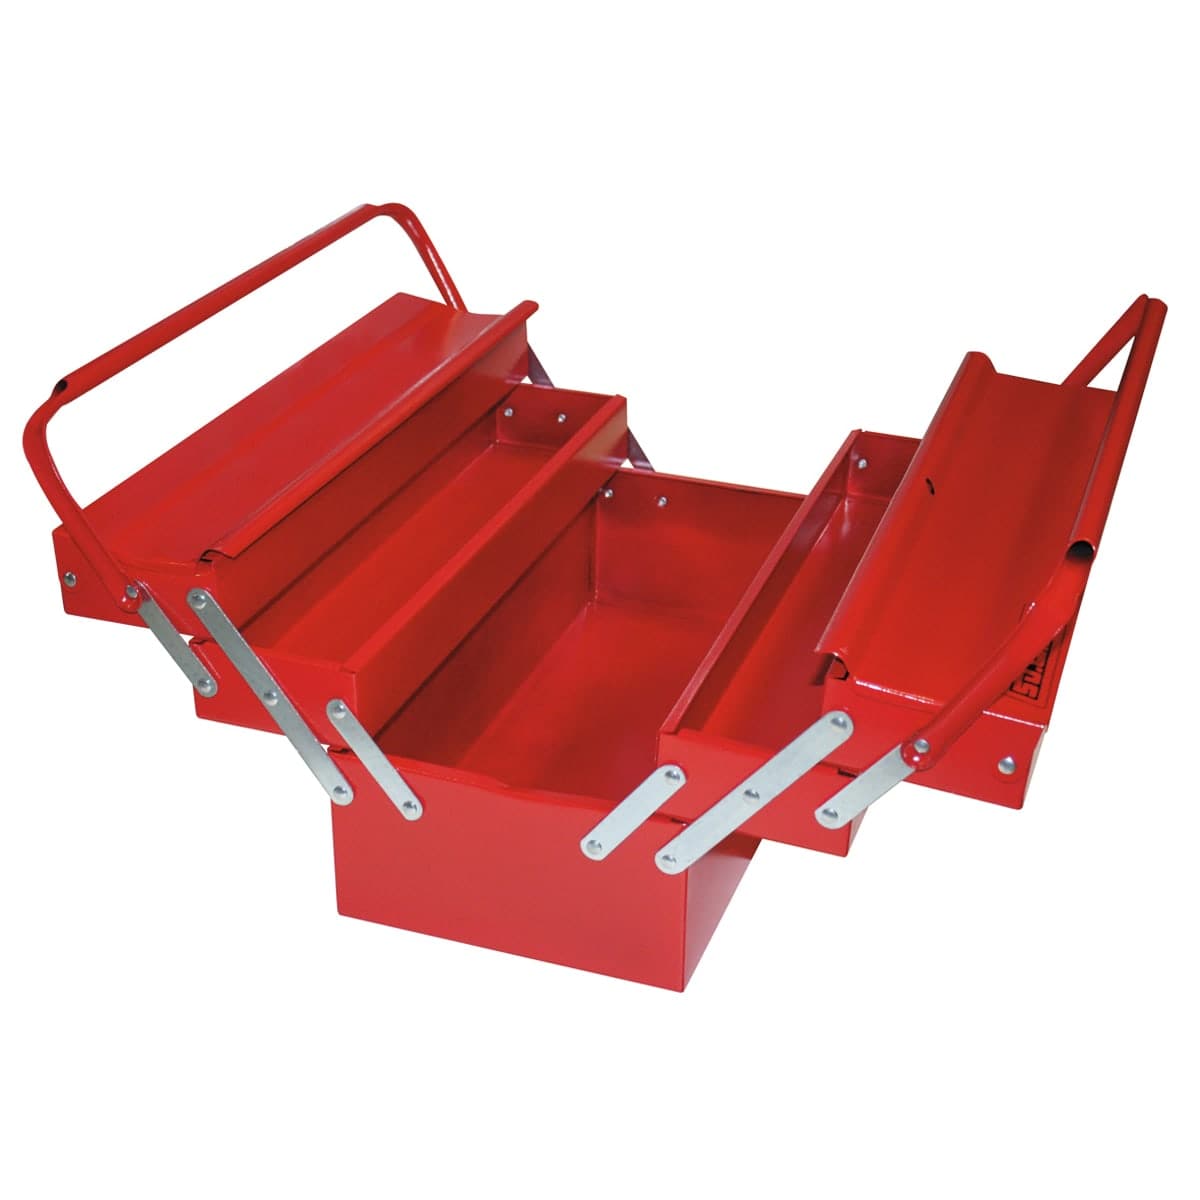 METAL TOOLBOX WITH 5 COMPARTMENTS - best price from Maltashopper.com BR400000332